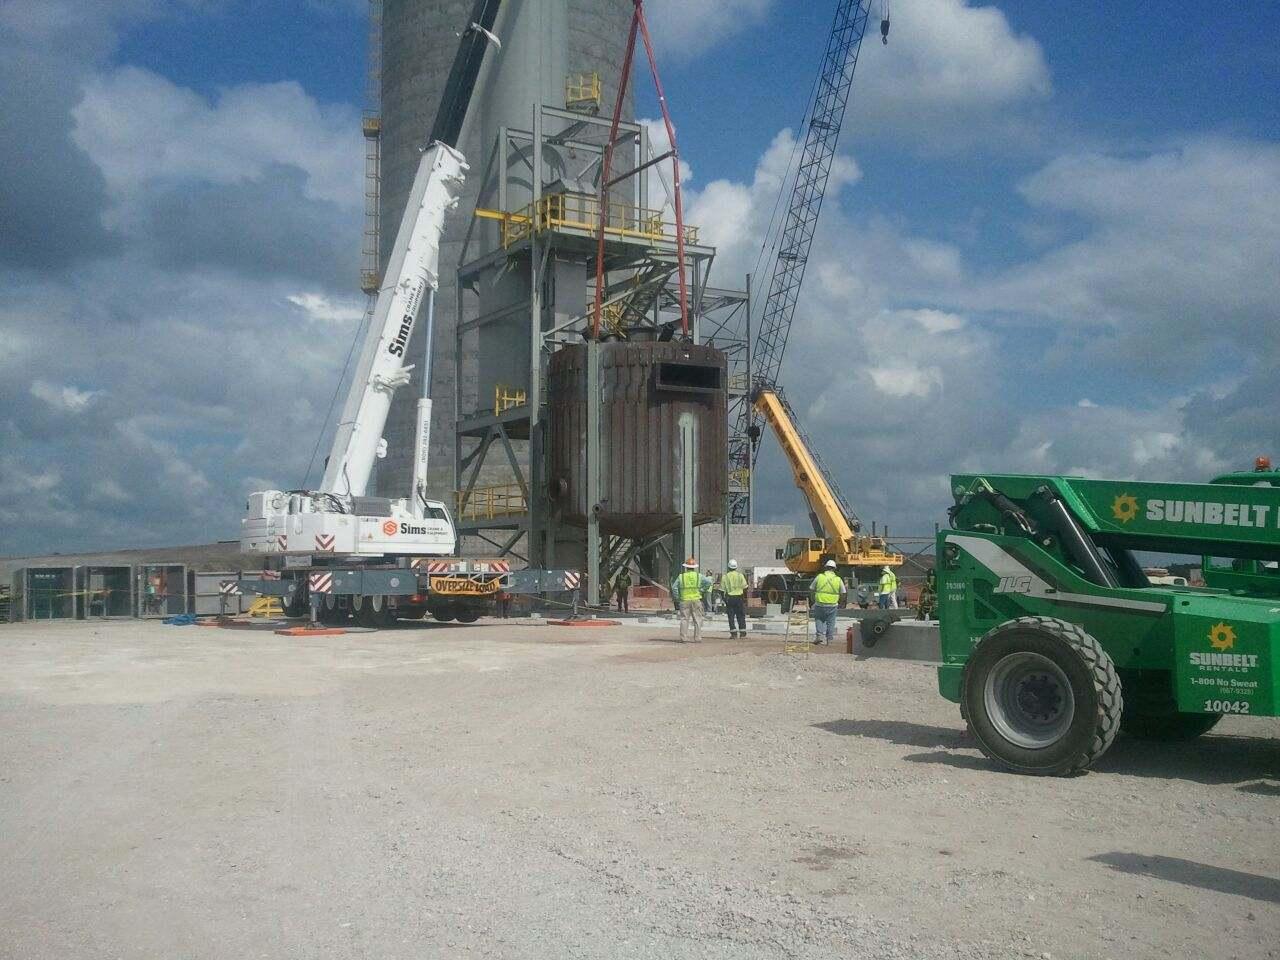 Moving the world's largest sulfur melter tank 20 miles from the fabrication facility to the plant site in central Florida required teamwork among 30 people at 12 companies and 21 vehicles.